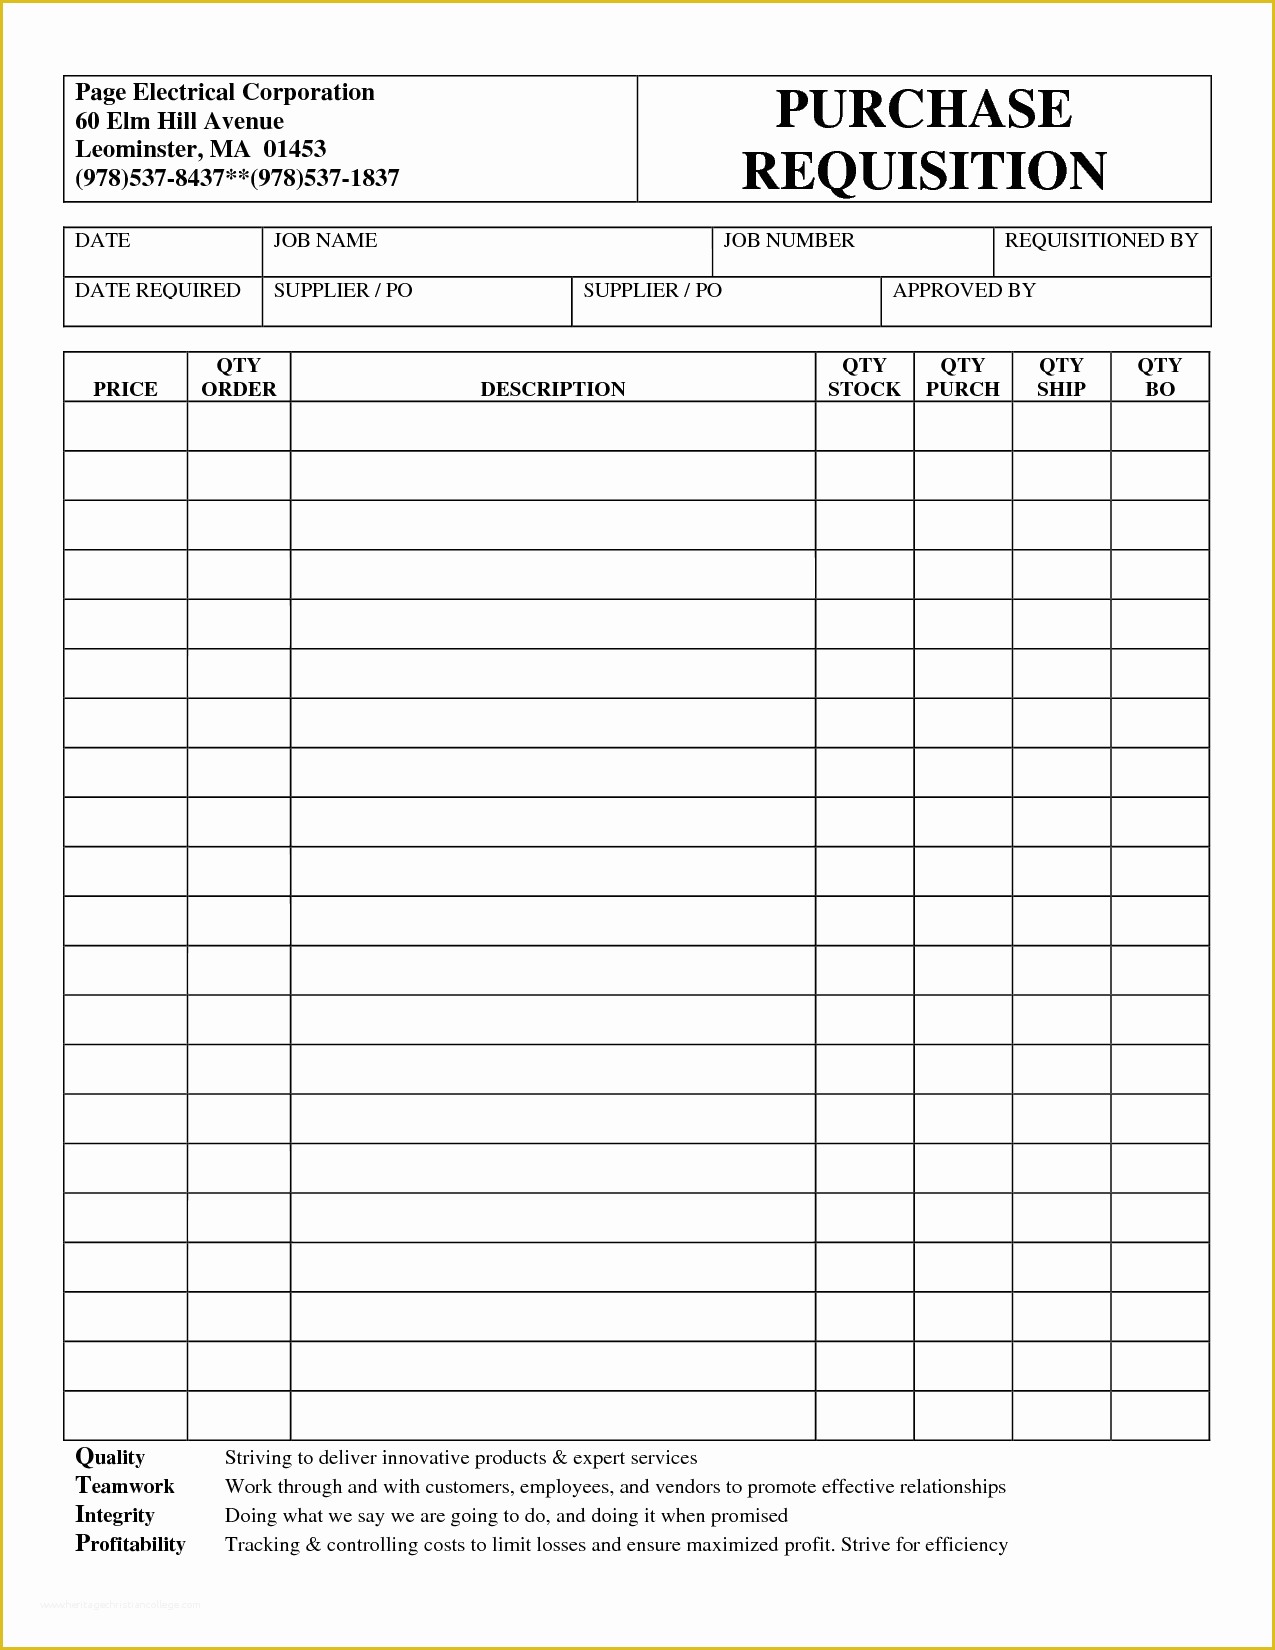 Free Requisition form Template Excel Of Purchase Requisition form